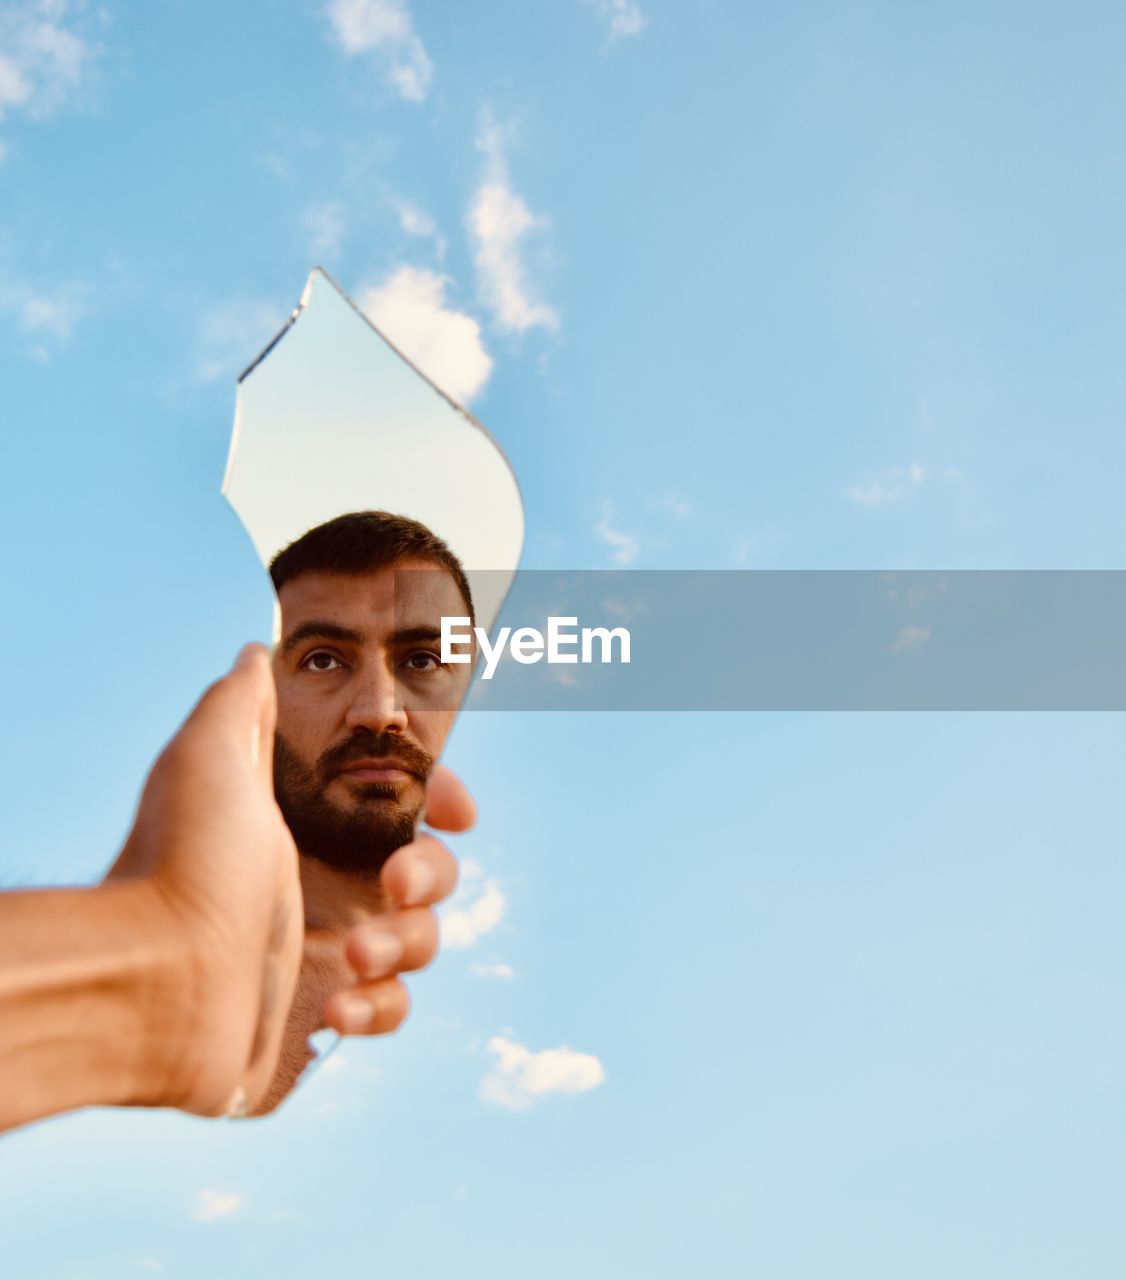 Cropped hand of man holding broken mirror against sky